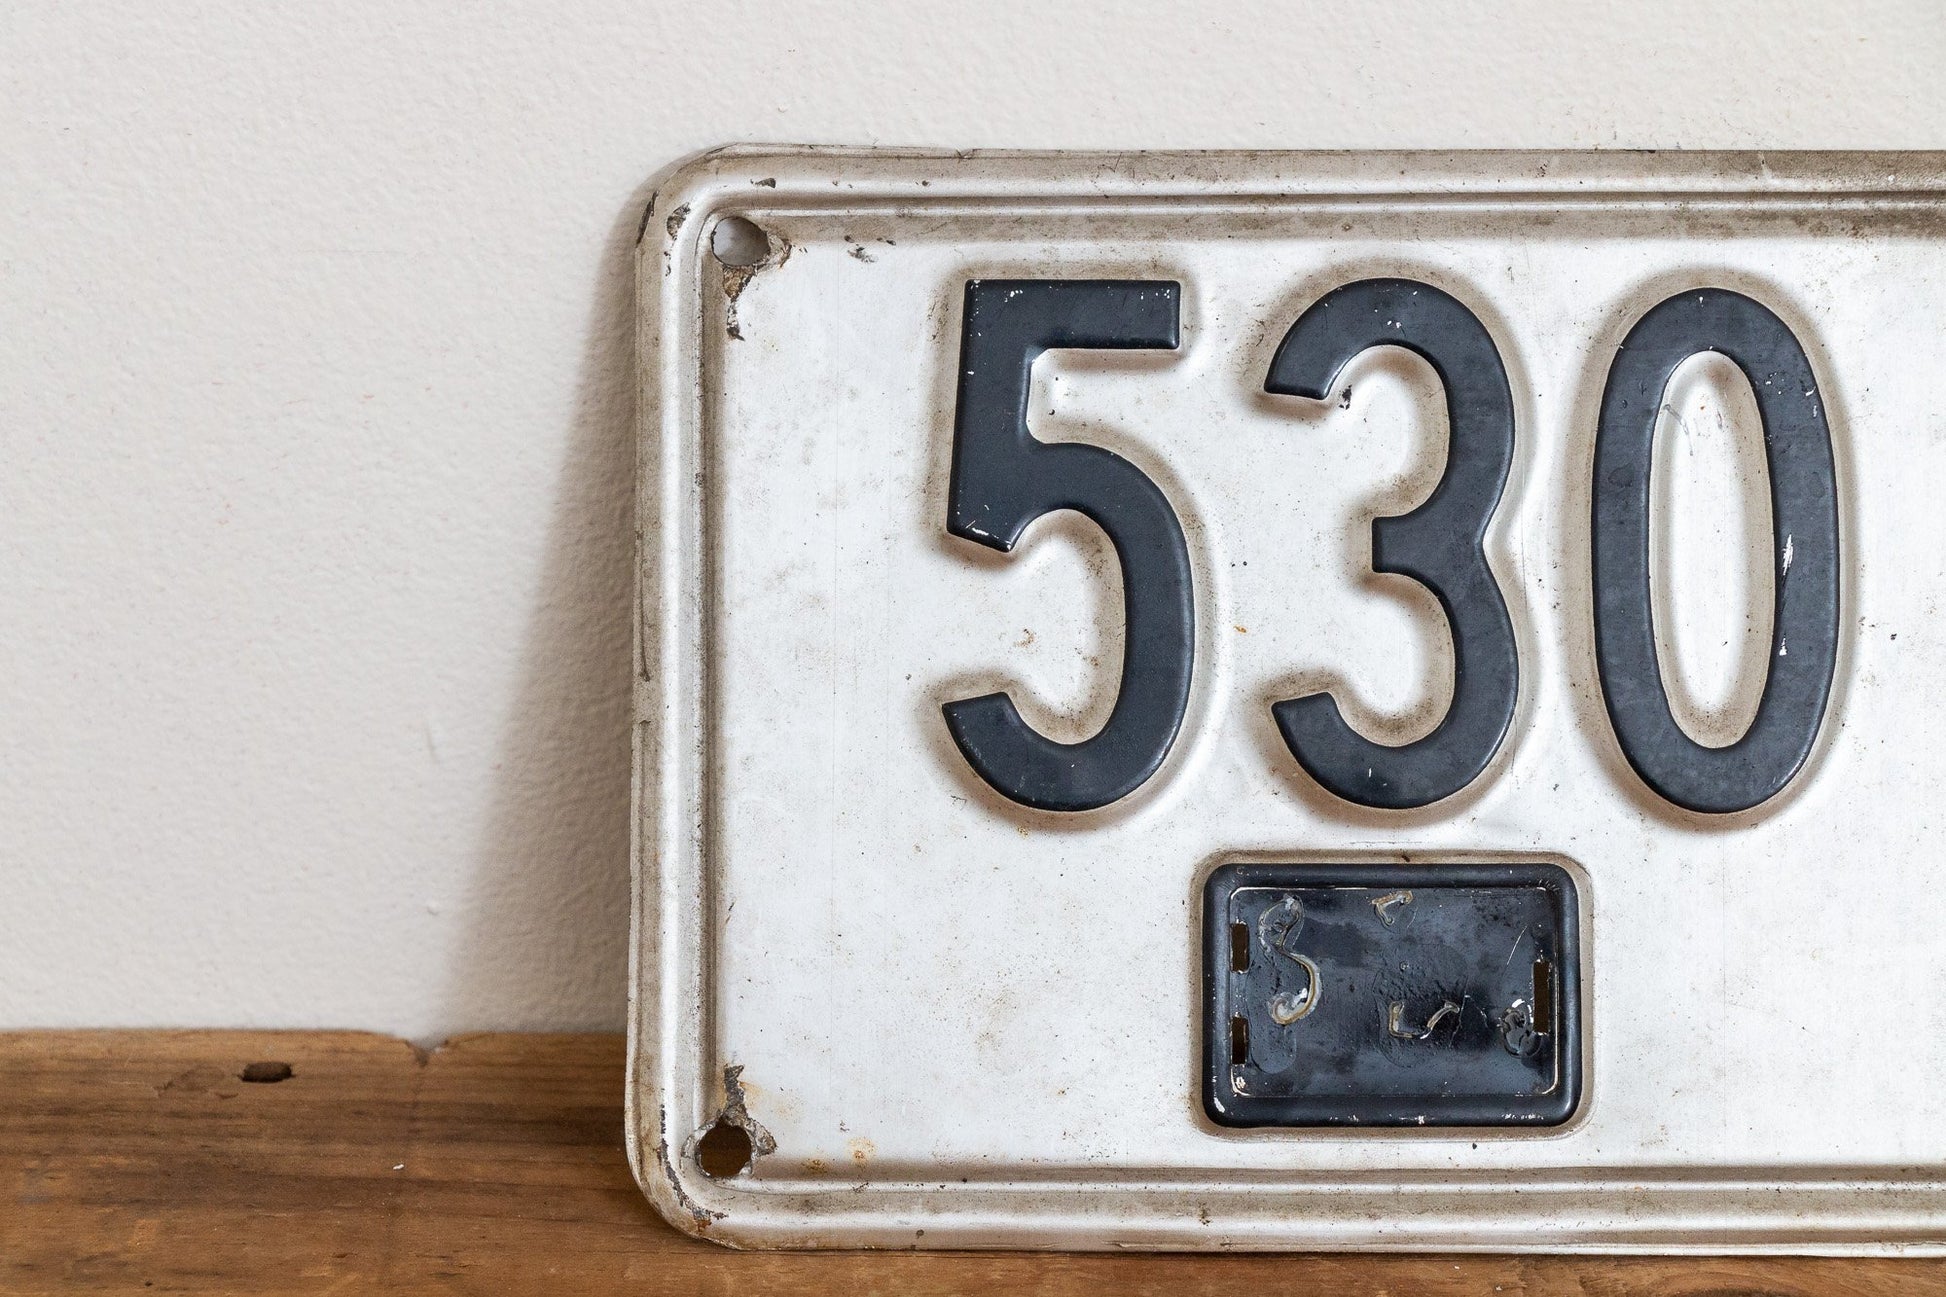 530 Connecticut 1937 License Plate 3 Digit Low Number Vintage Wall Decor - Eagle's Eye Finds